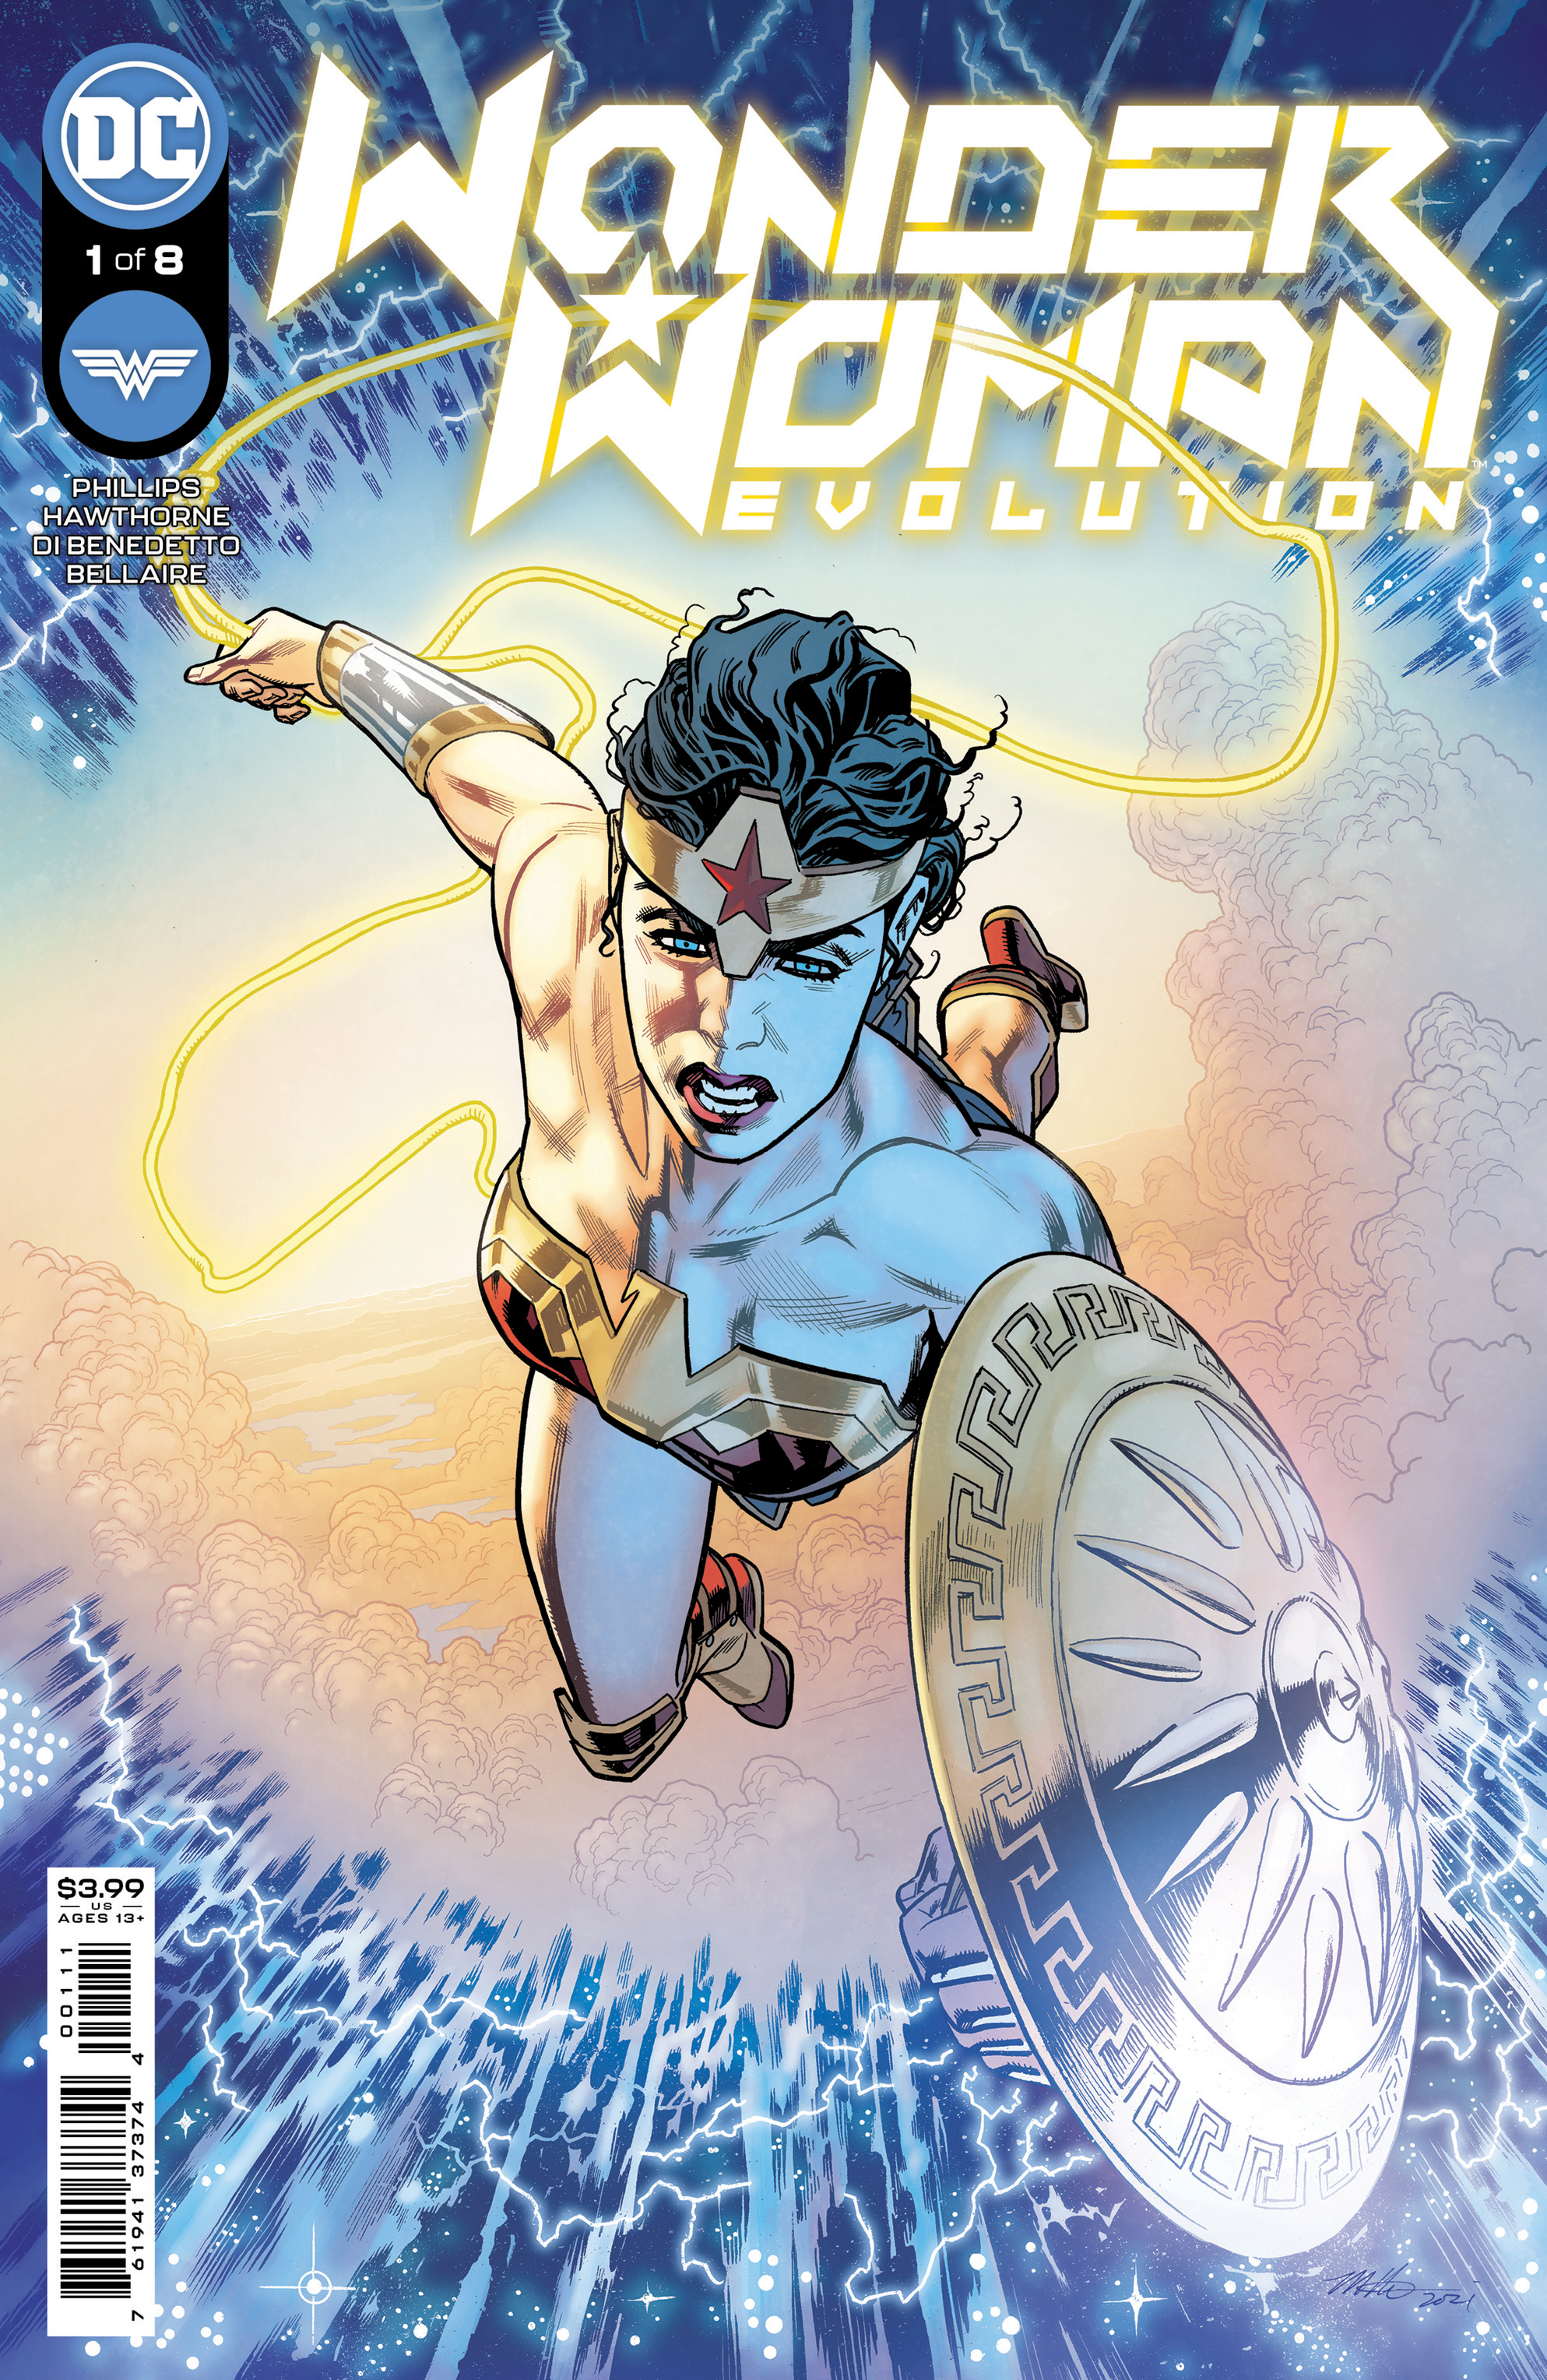 Wonder Woman Evolution #1 Cover A Mike Hawthorne (Of 8)